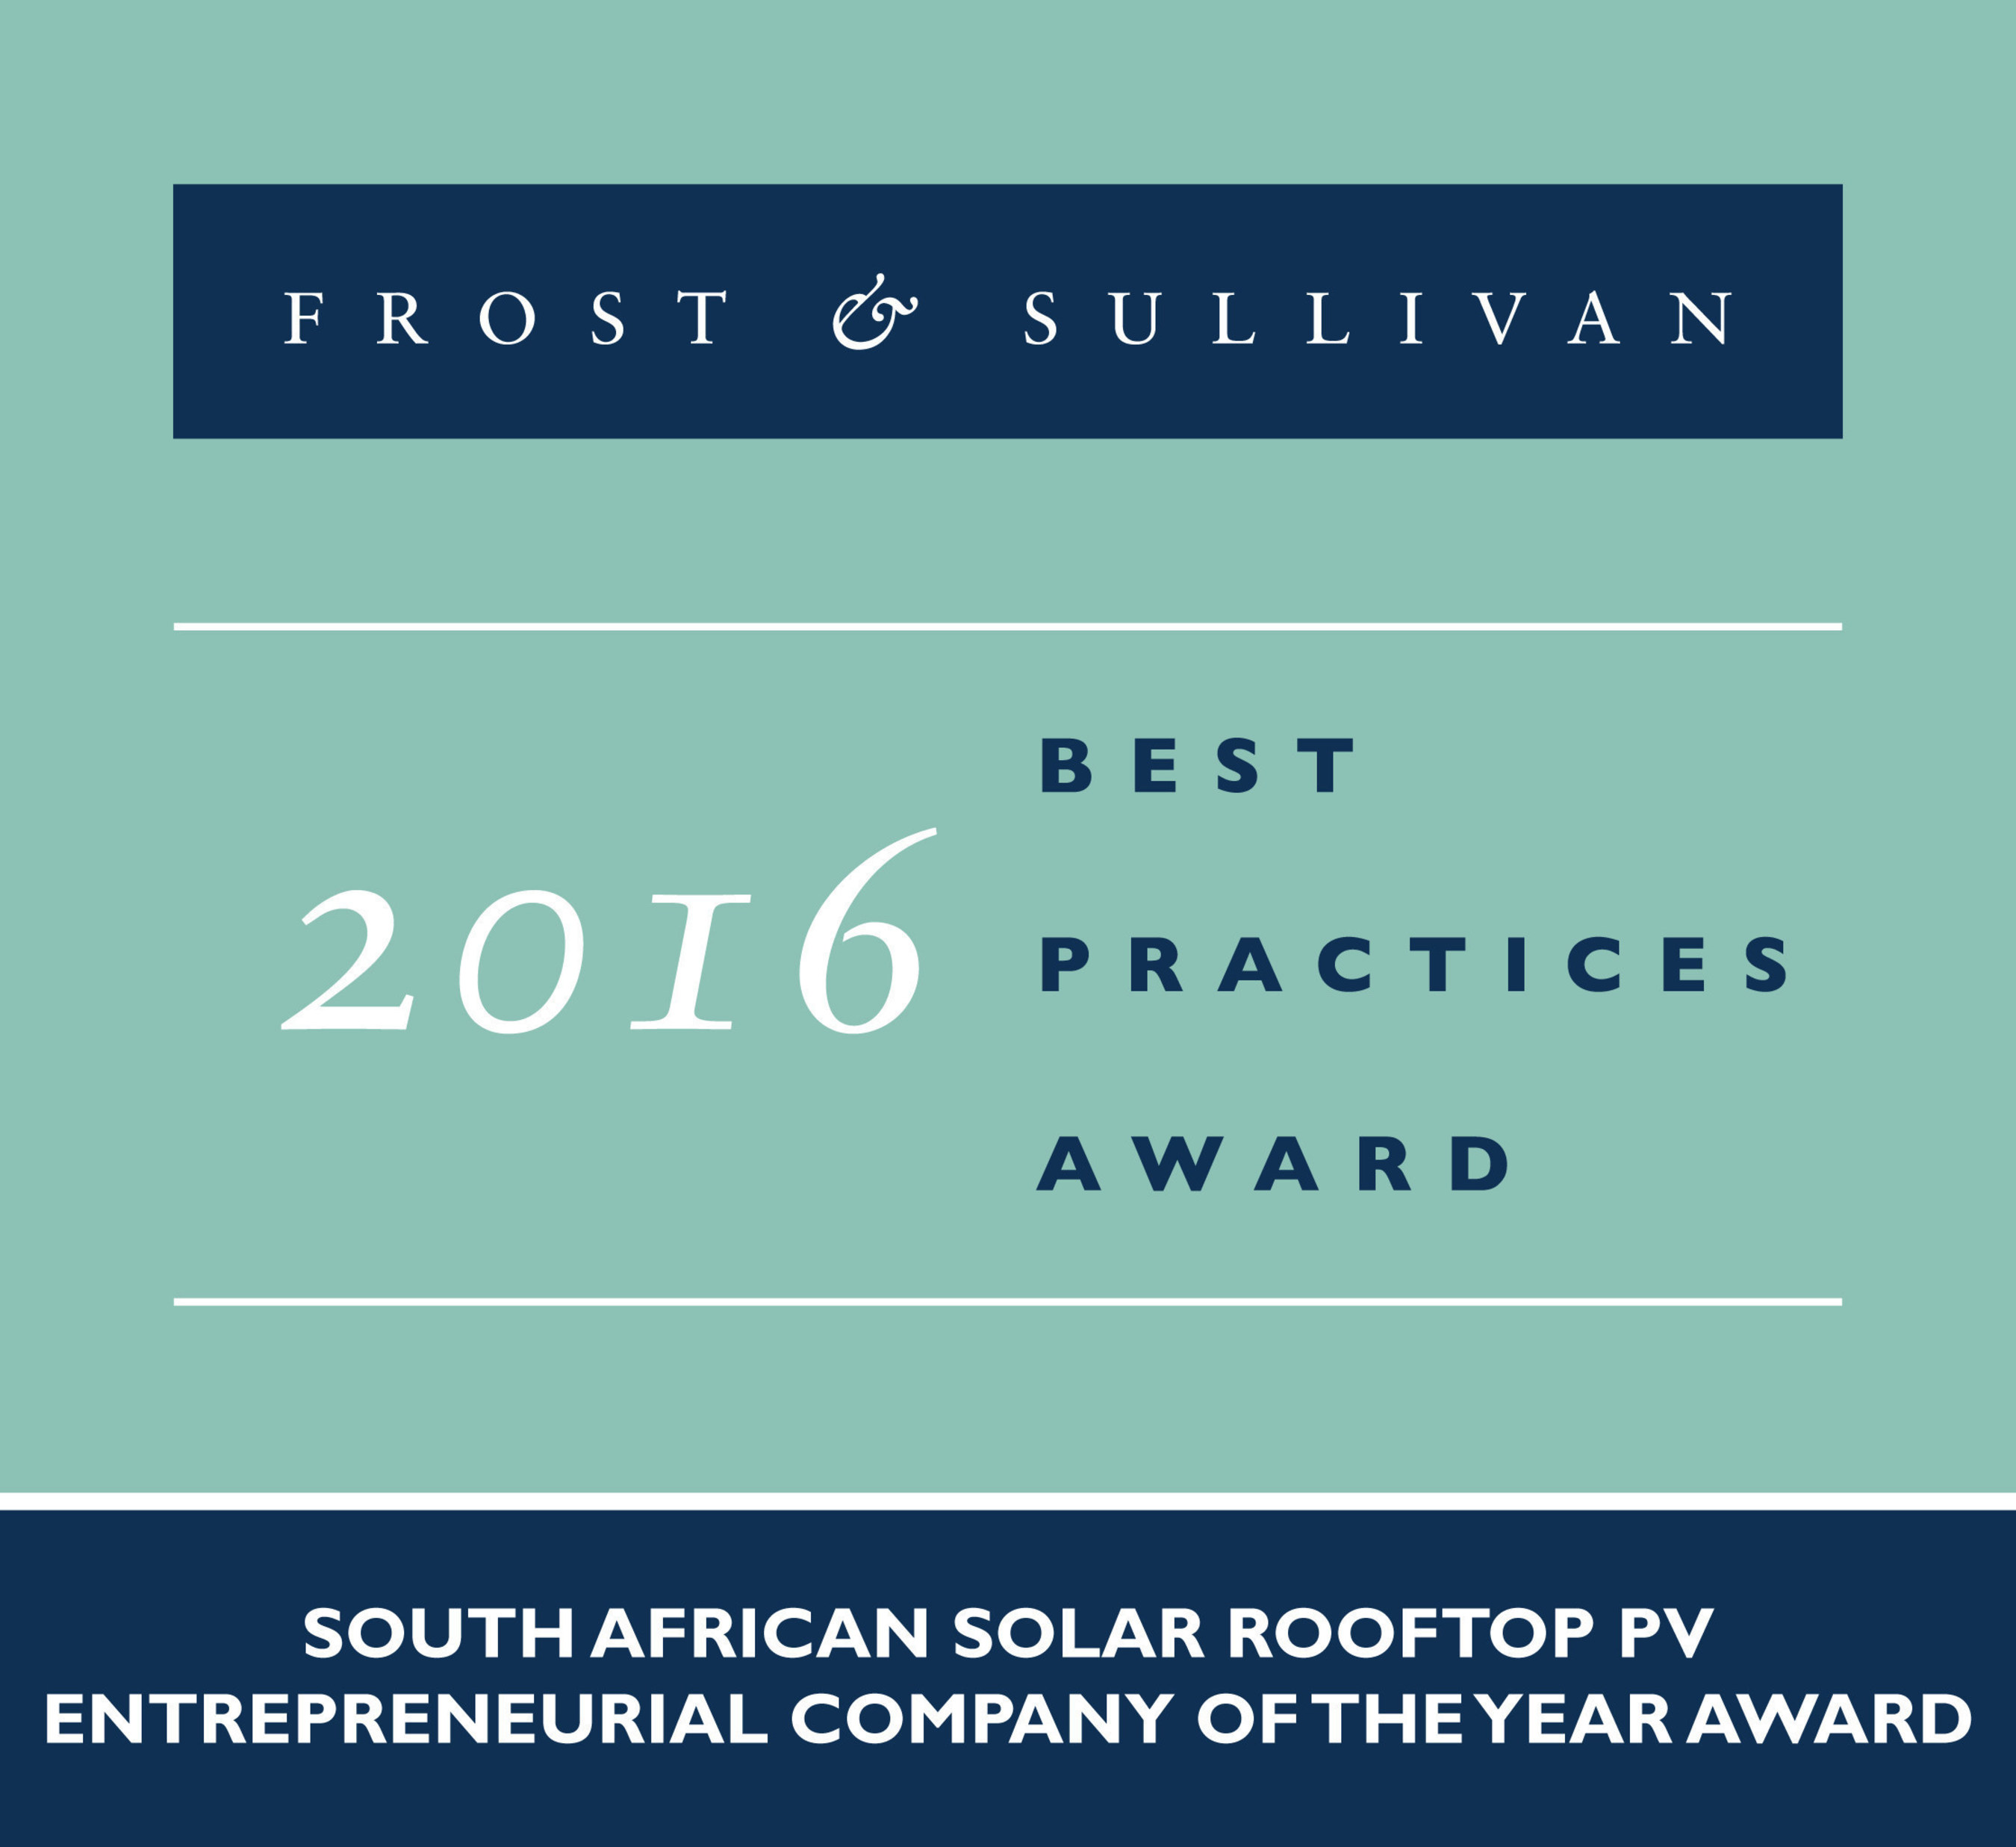 Altering The Landscape Of The Solar Rooftop PV Industry In South Africa